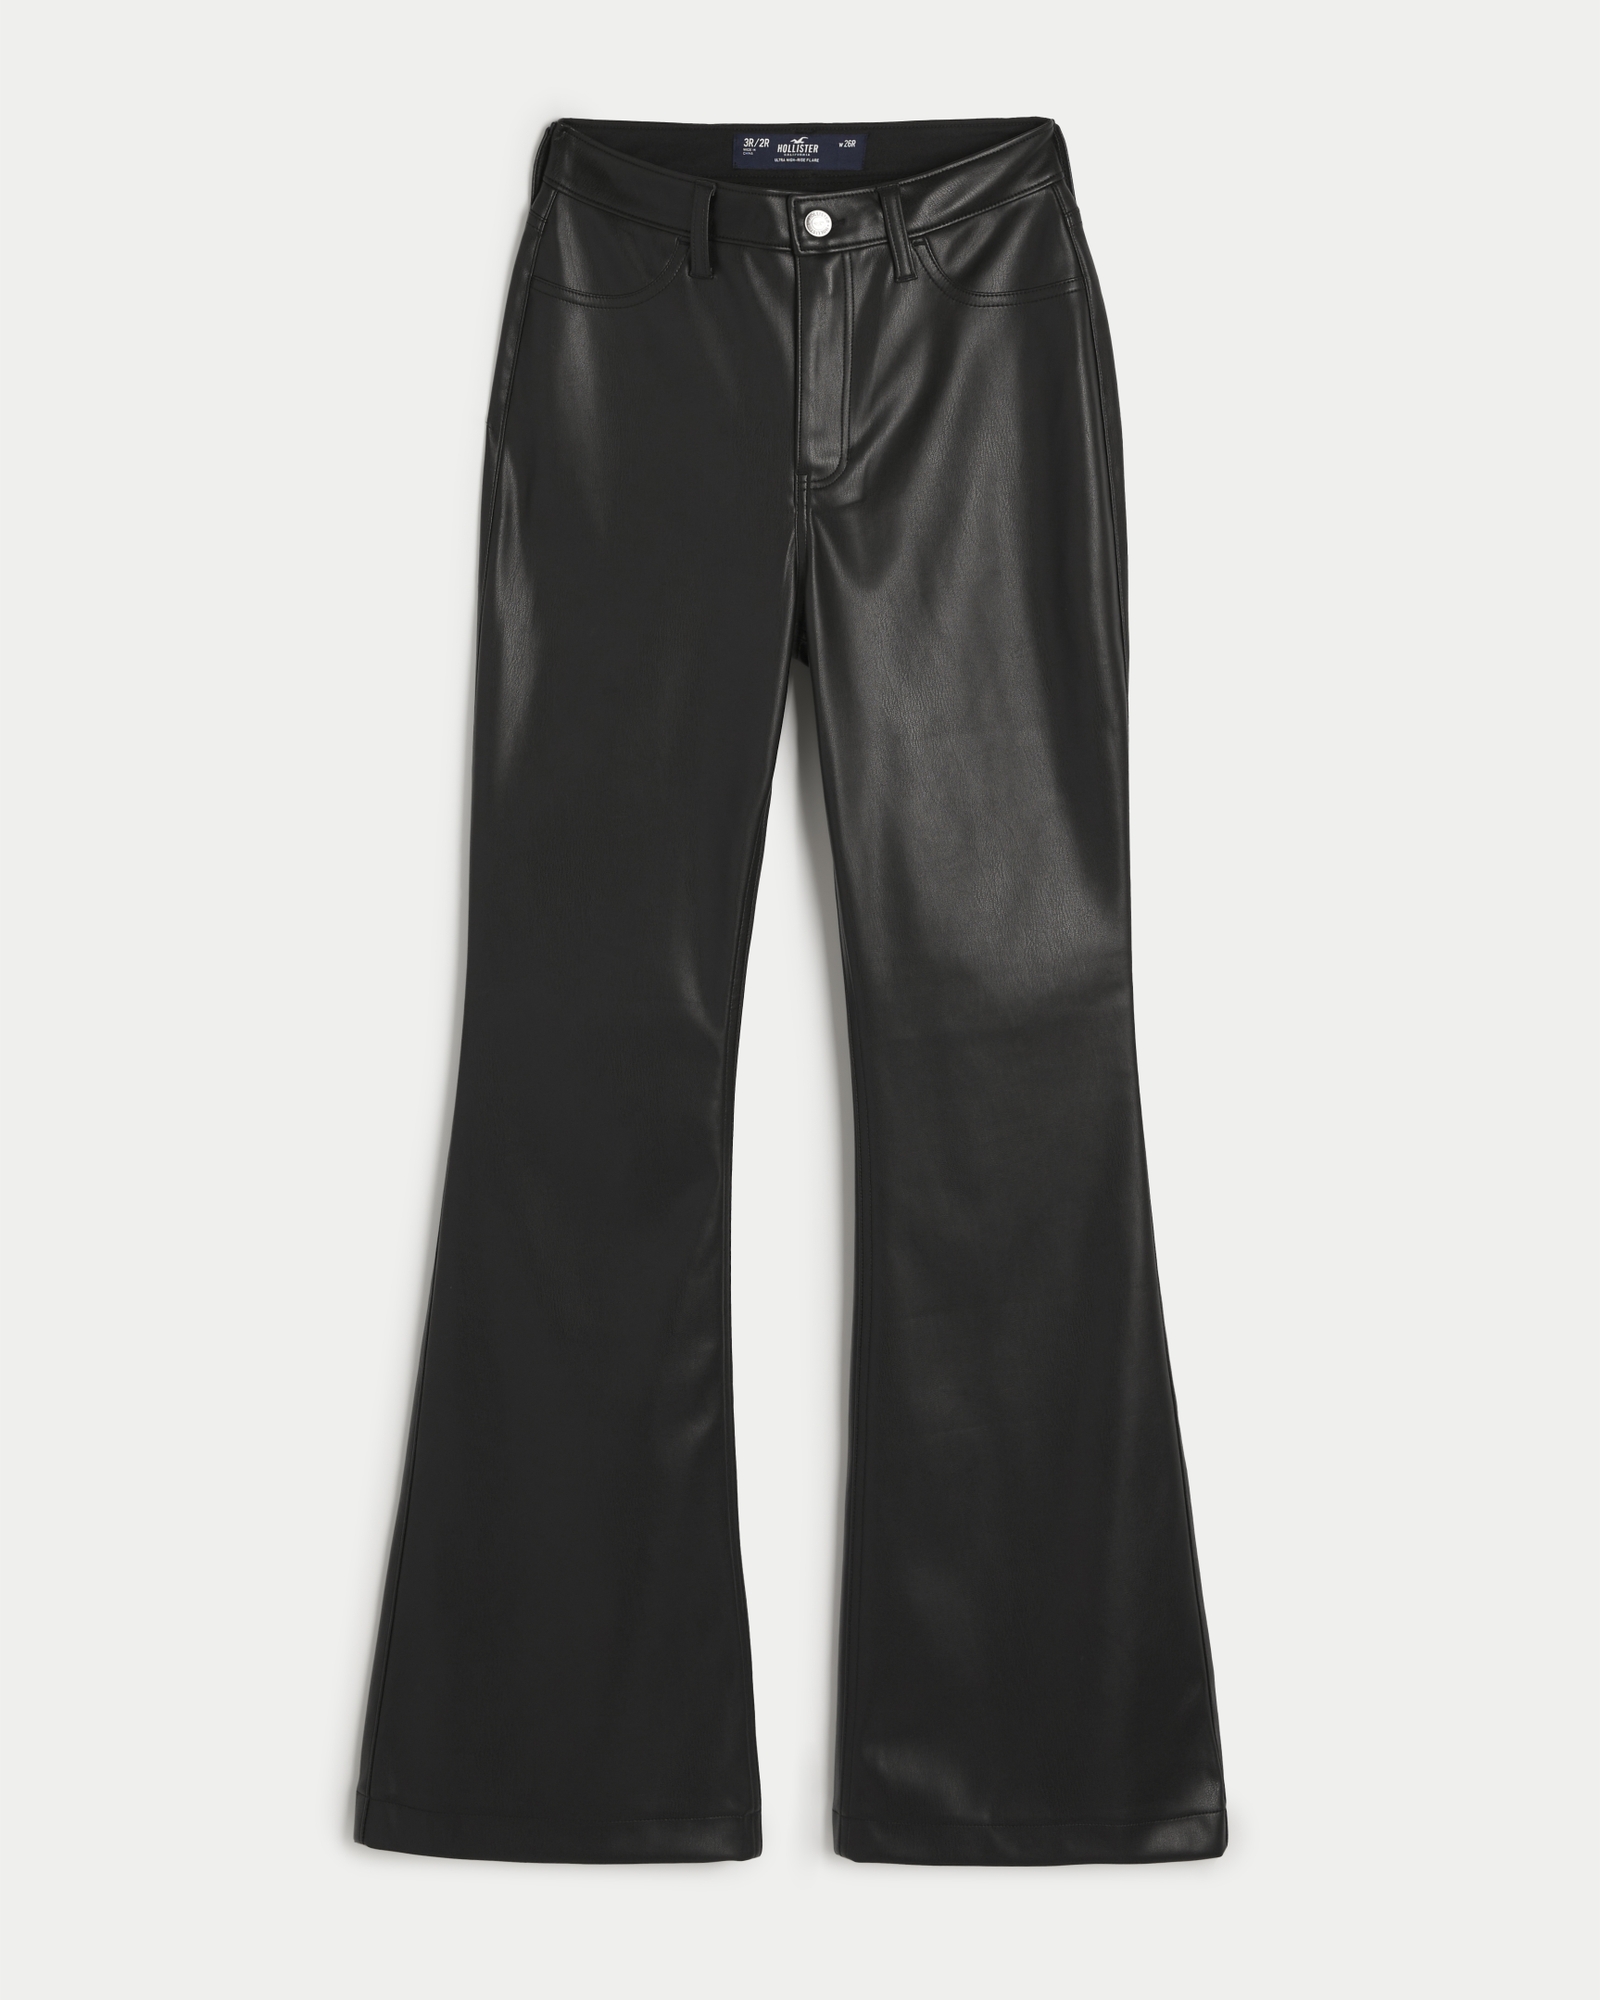 Hollister Ultra Rise Straight Leg Black Leather Pants Size 31 - $17 (71%  Off Retail) - From Julia